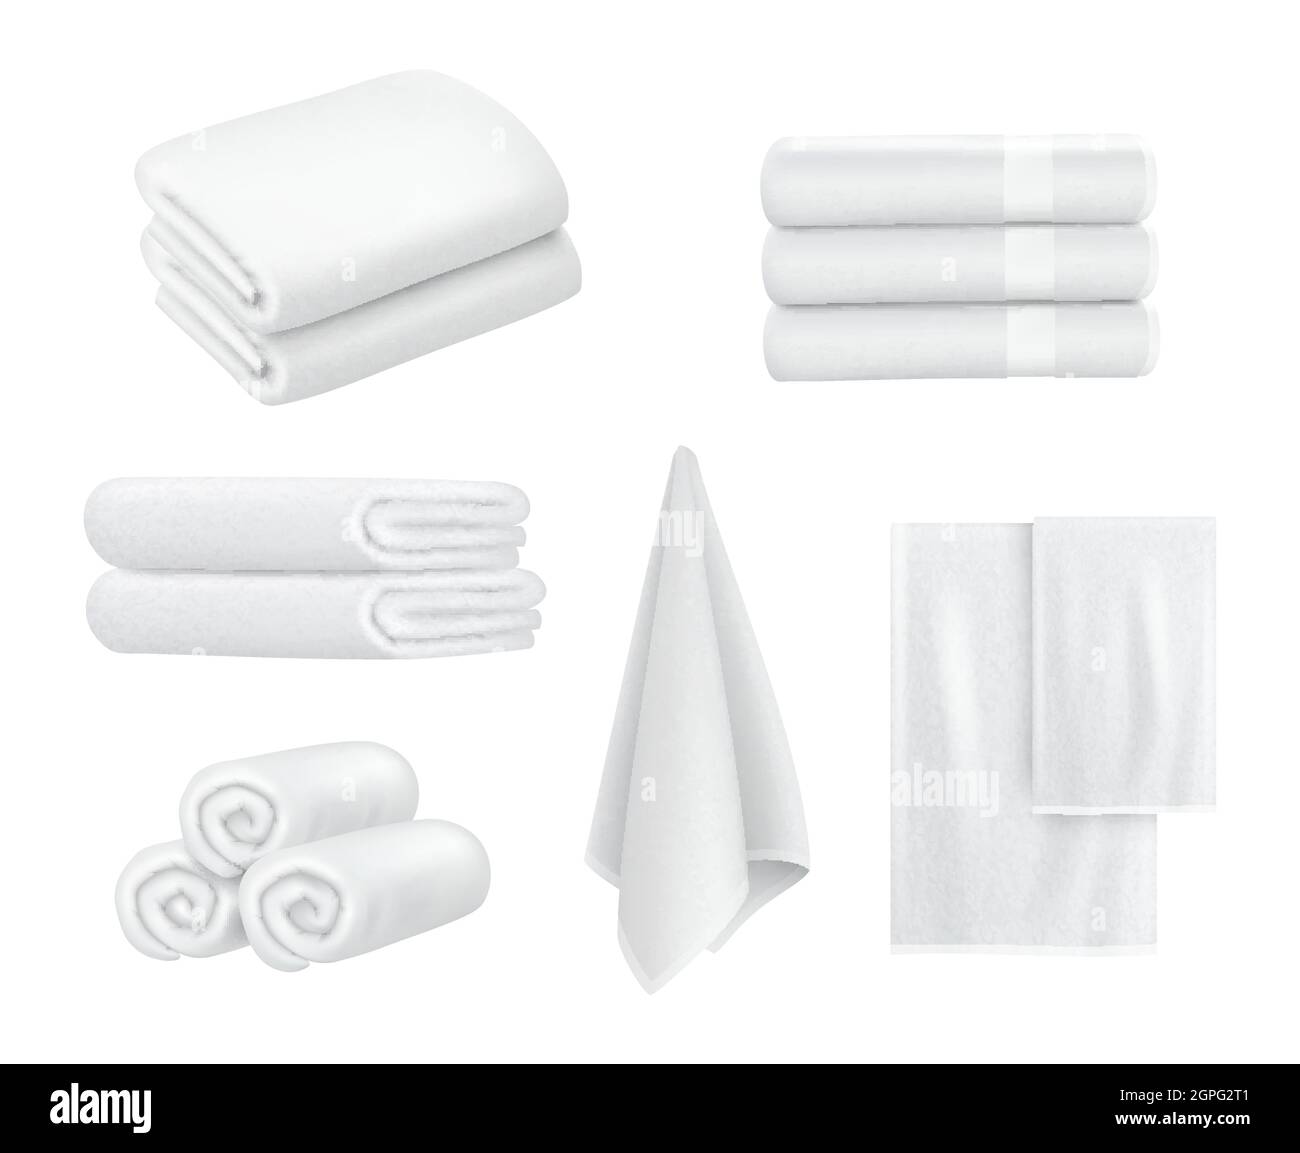 Towel stack. Luxury hotel textile items for bathroom sport or resort spa hygiene items white towels vector collection realistic Stock Vector